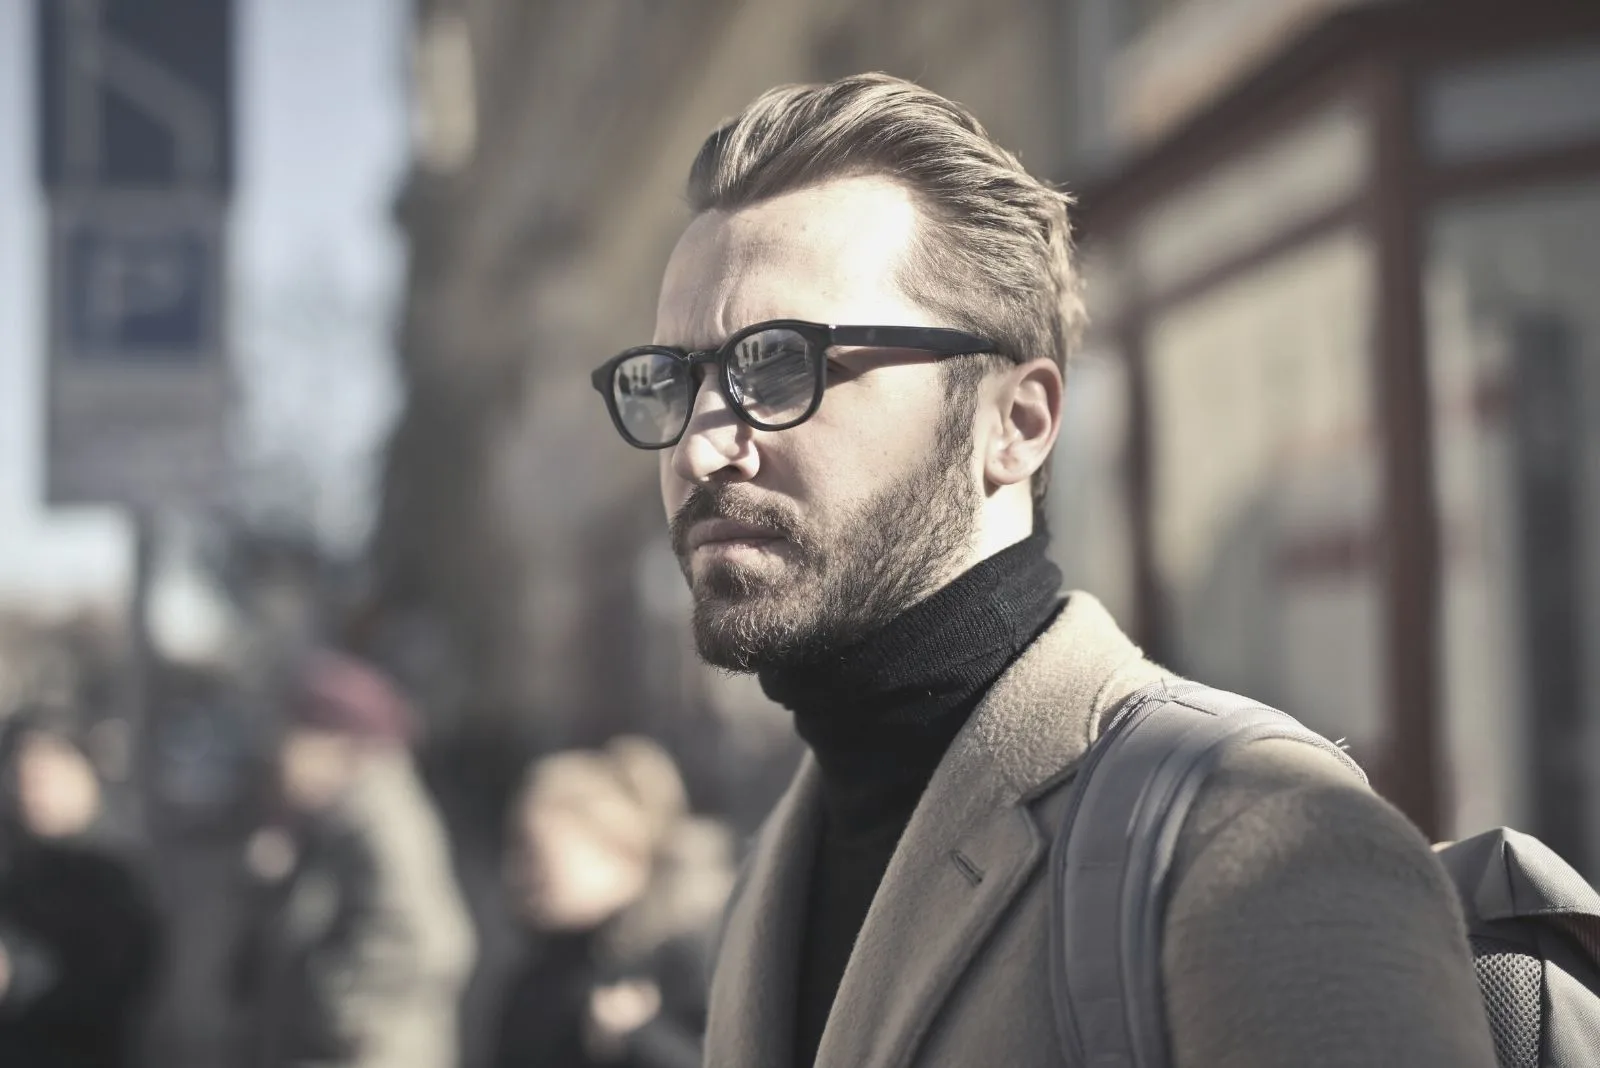 man wearing eyeglasses with suit in fashion standing outdoors